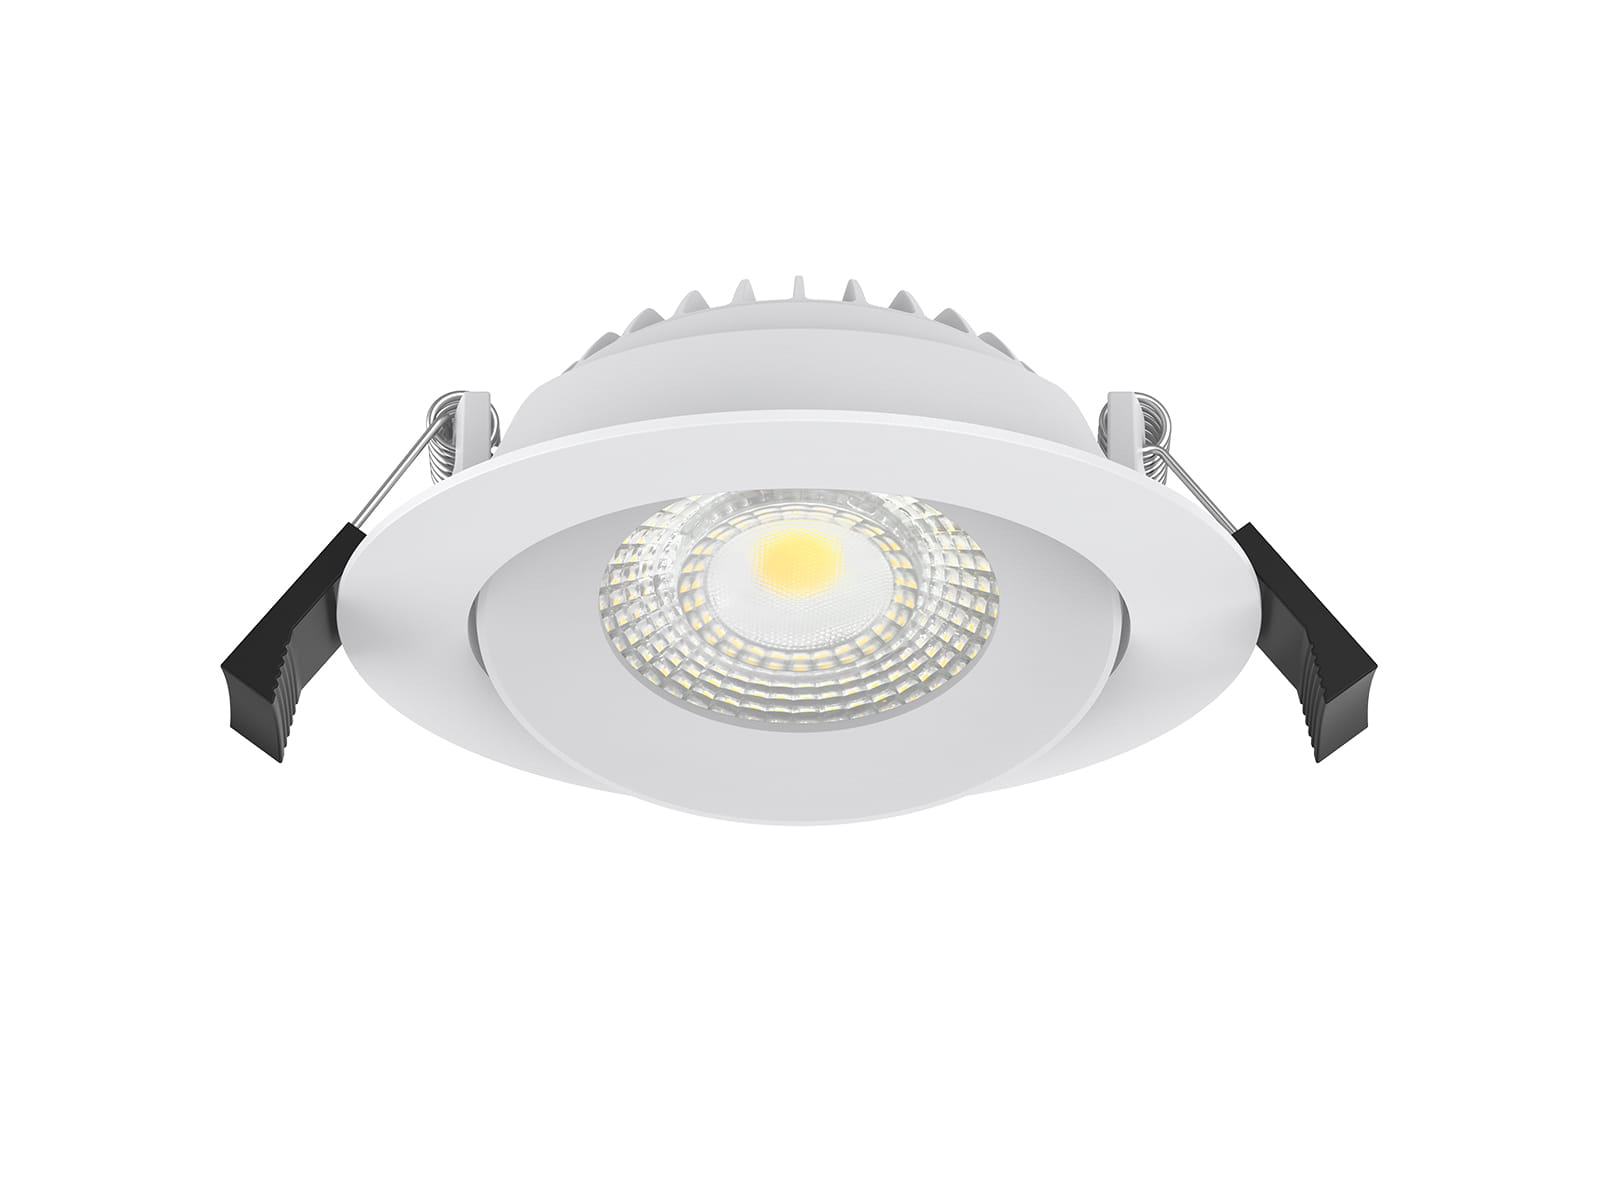 CL414 LED Downlight